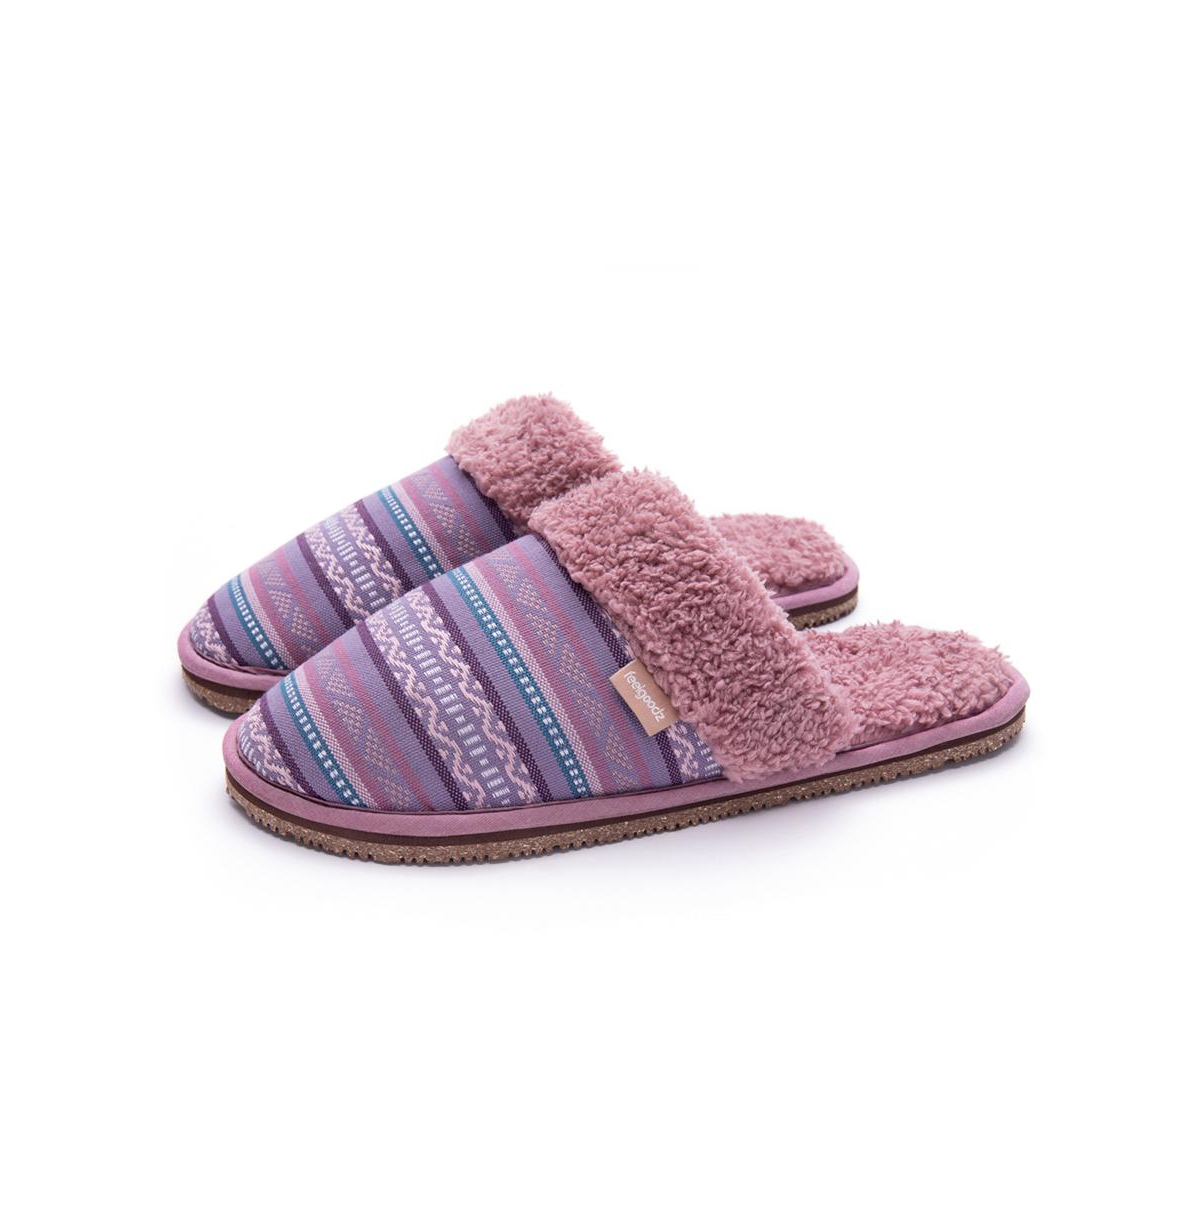 Women's Mule Slipper Artisan Woven Indoor / Outdoor House Shoes - Fig